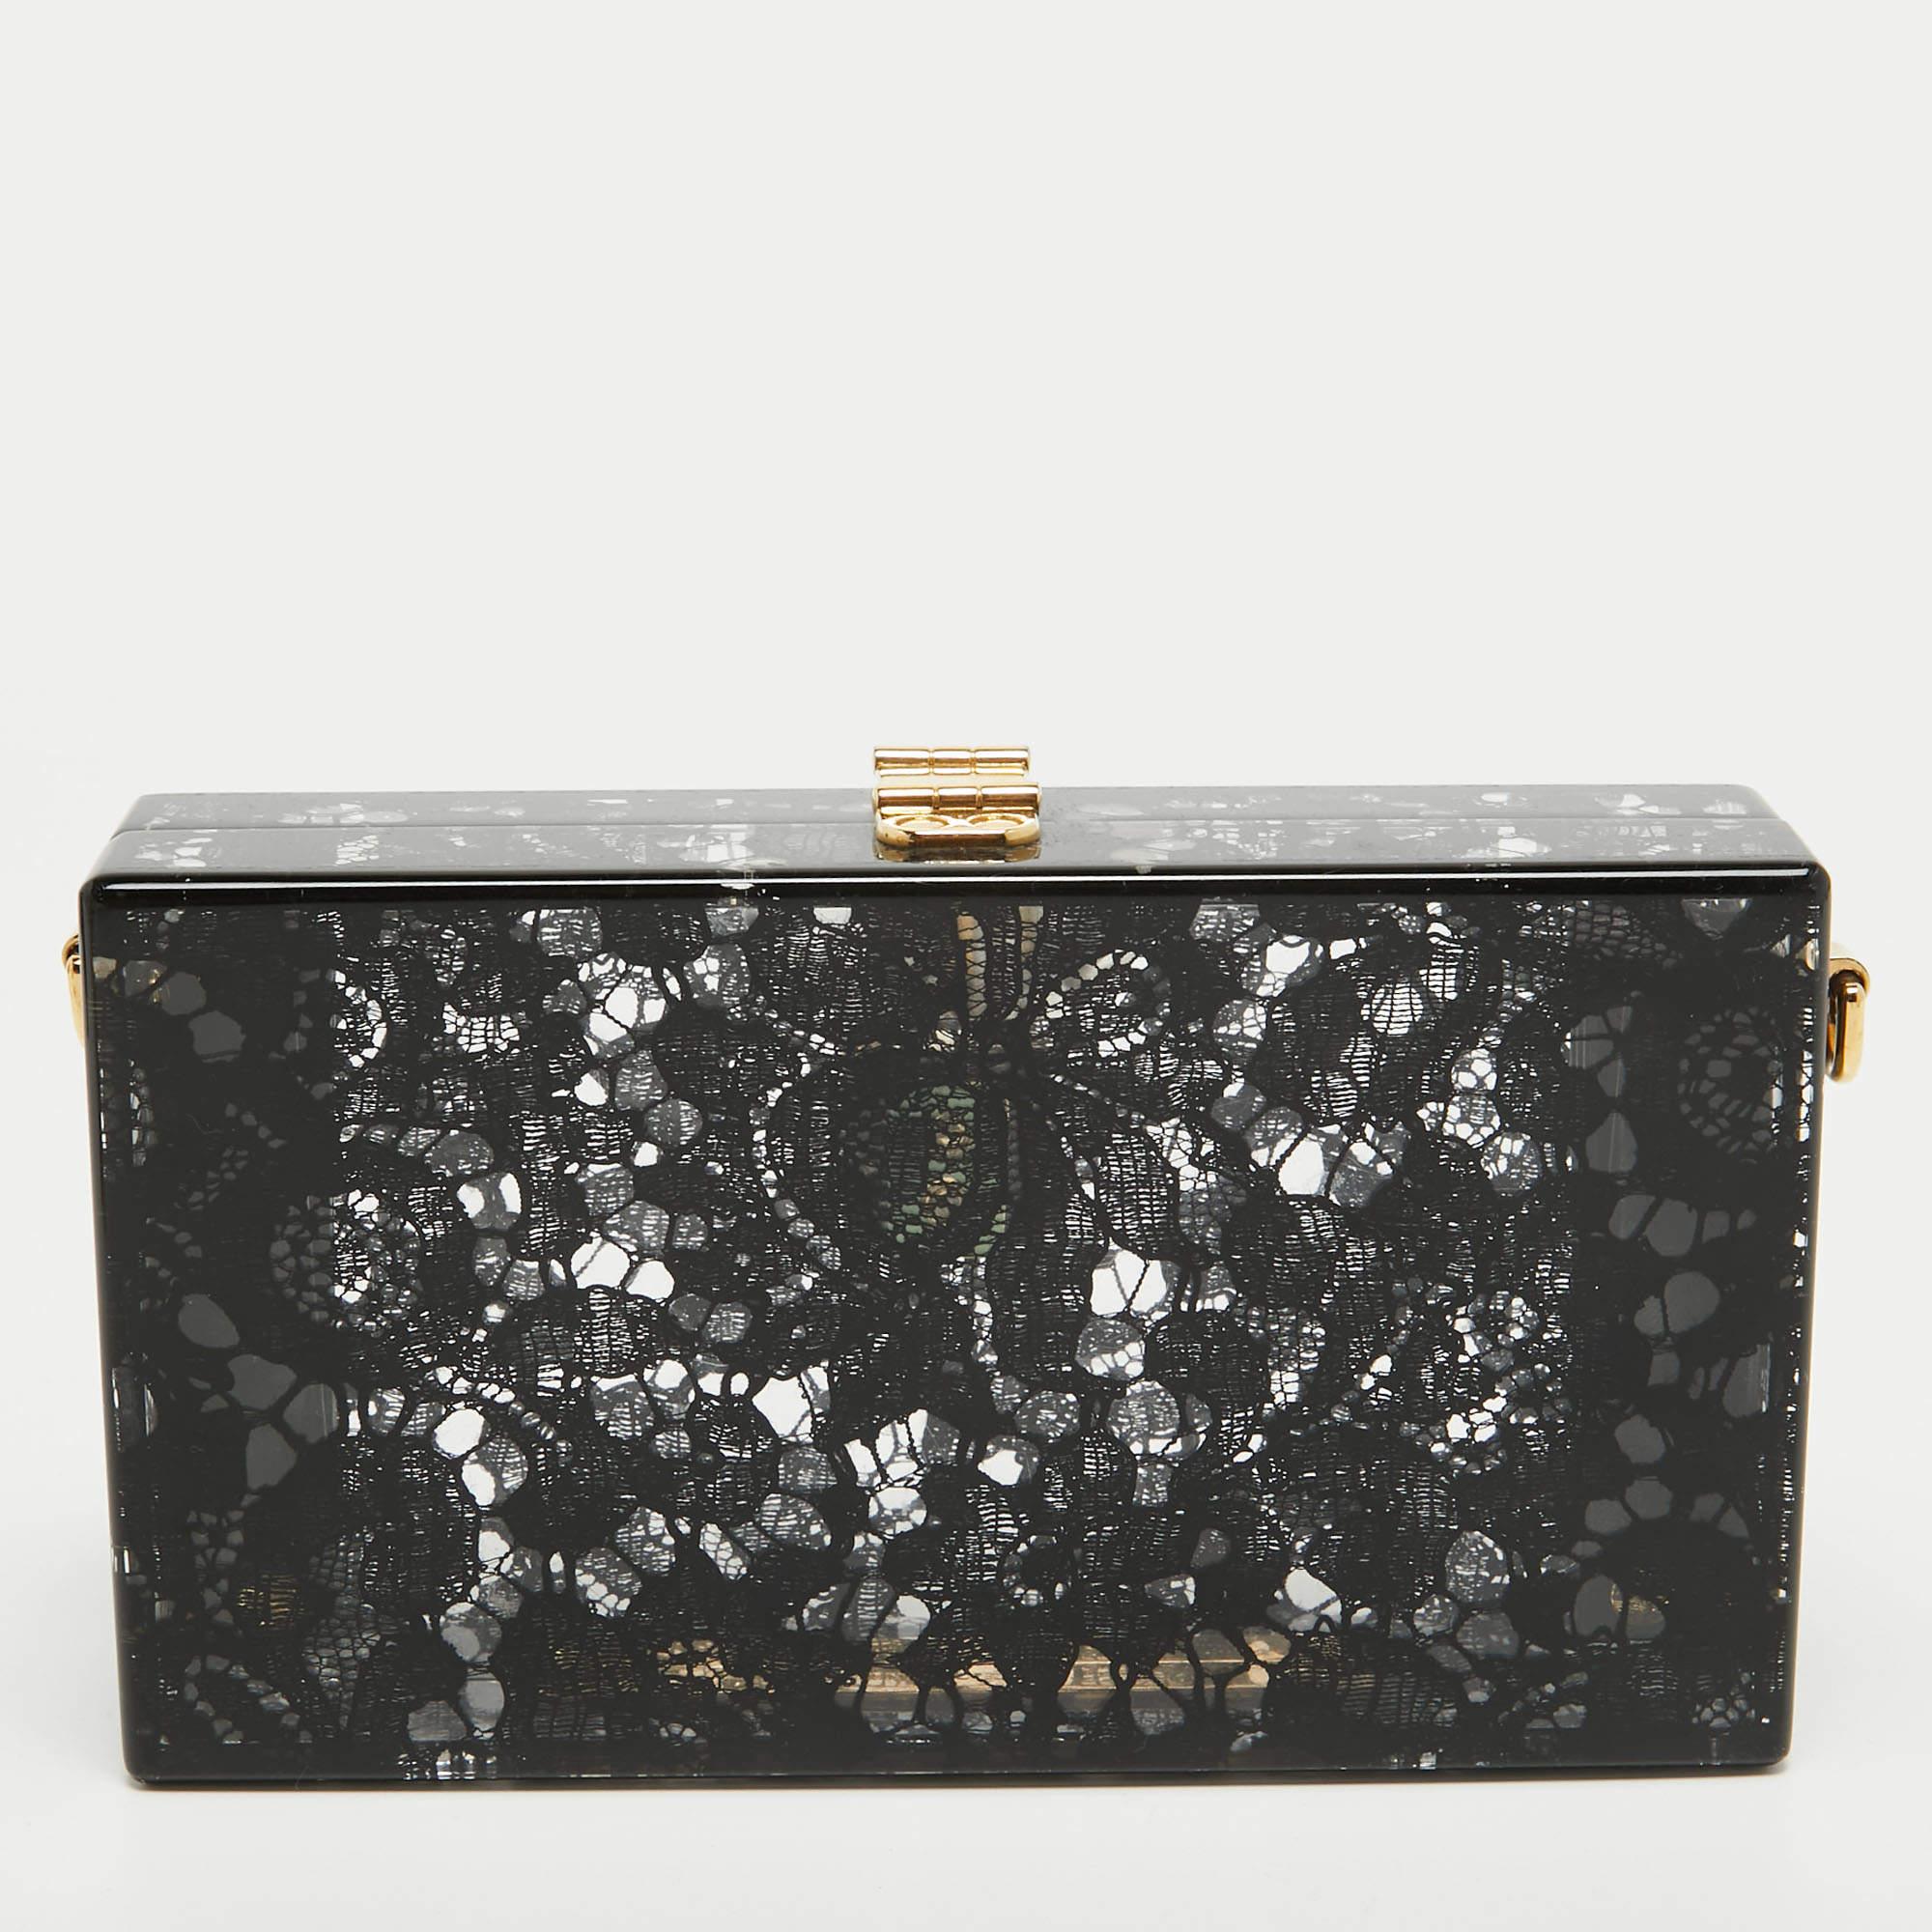 Elevate your evening attire with our Dolce & Gabbana clutch for women. Crafted with exquisite detail, it combines luxurious materials, a timeless design, and a touch of glamour, making it the perfect statement accessory.

